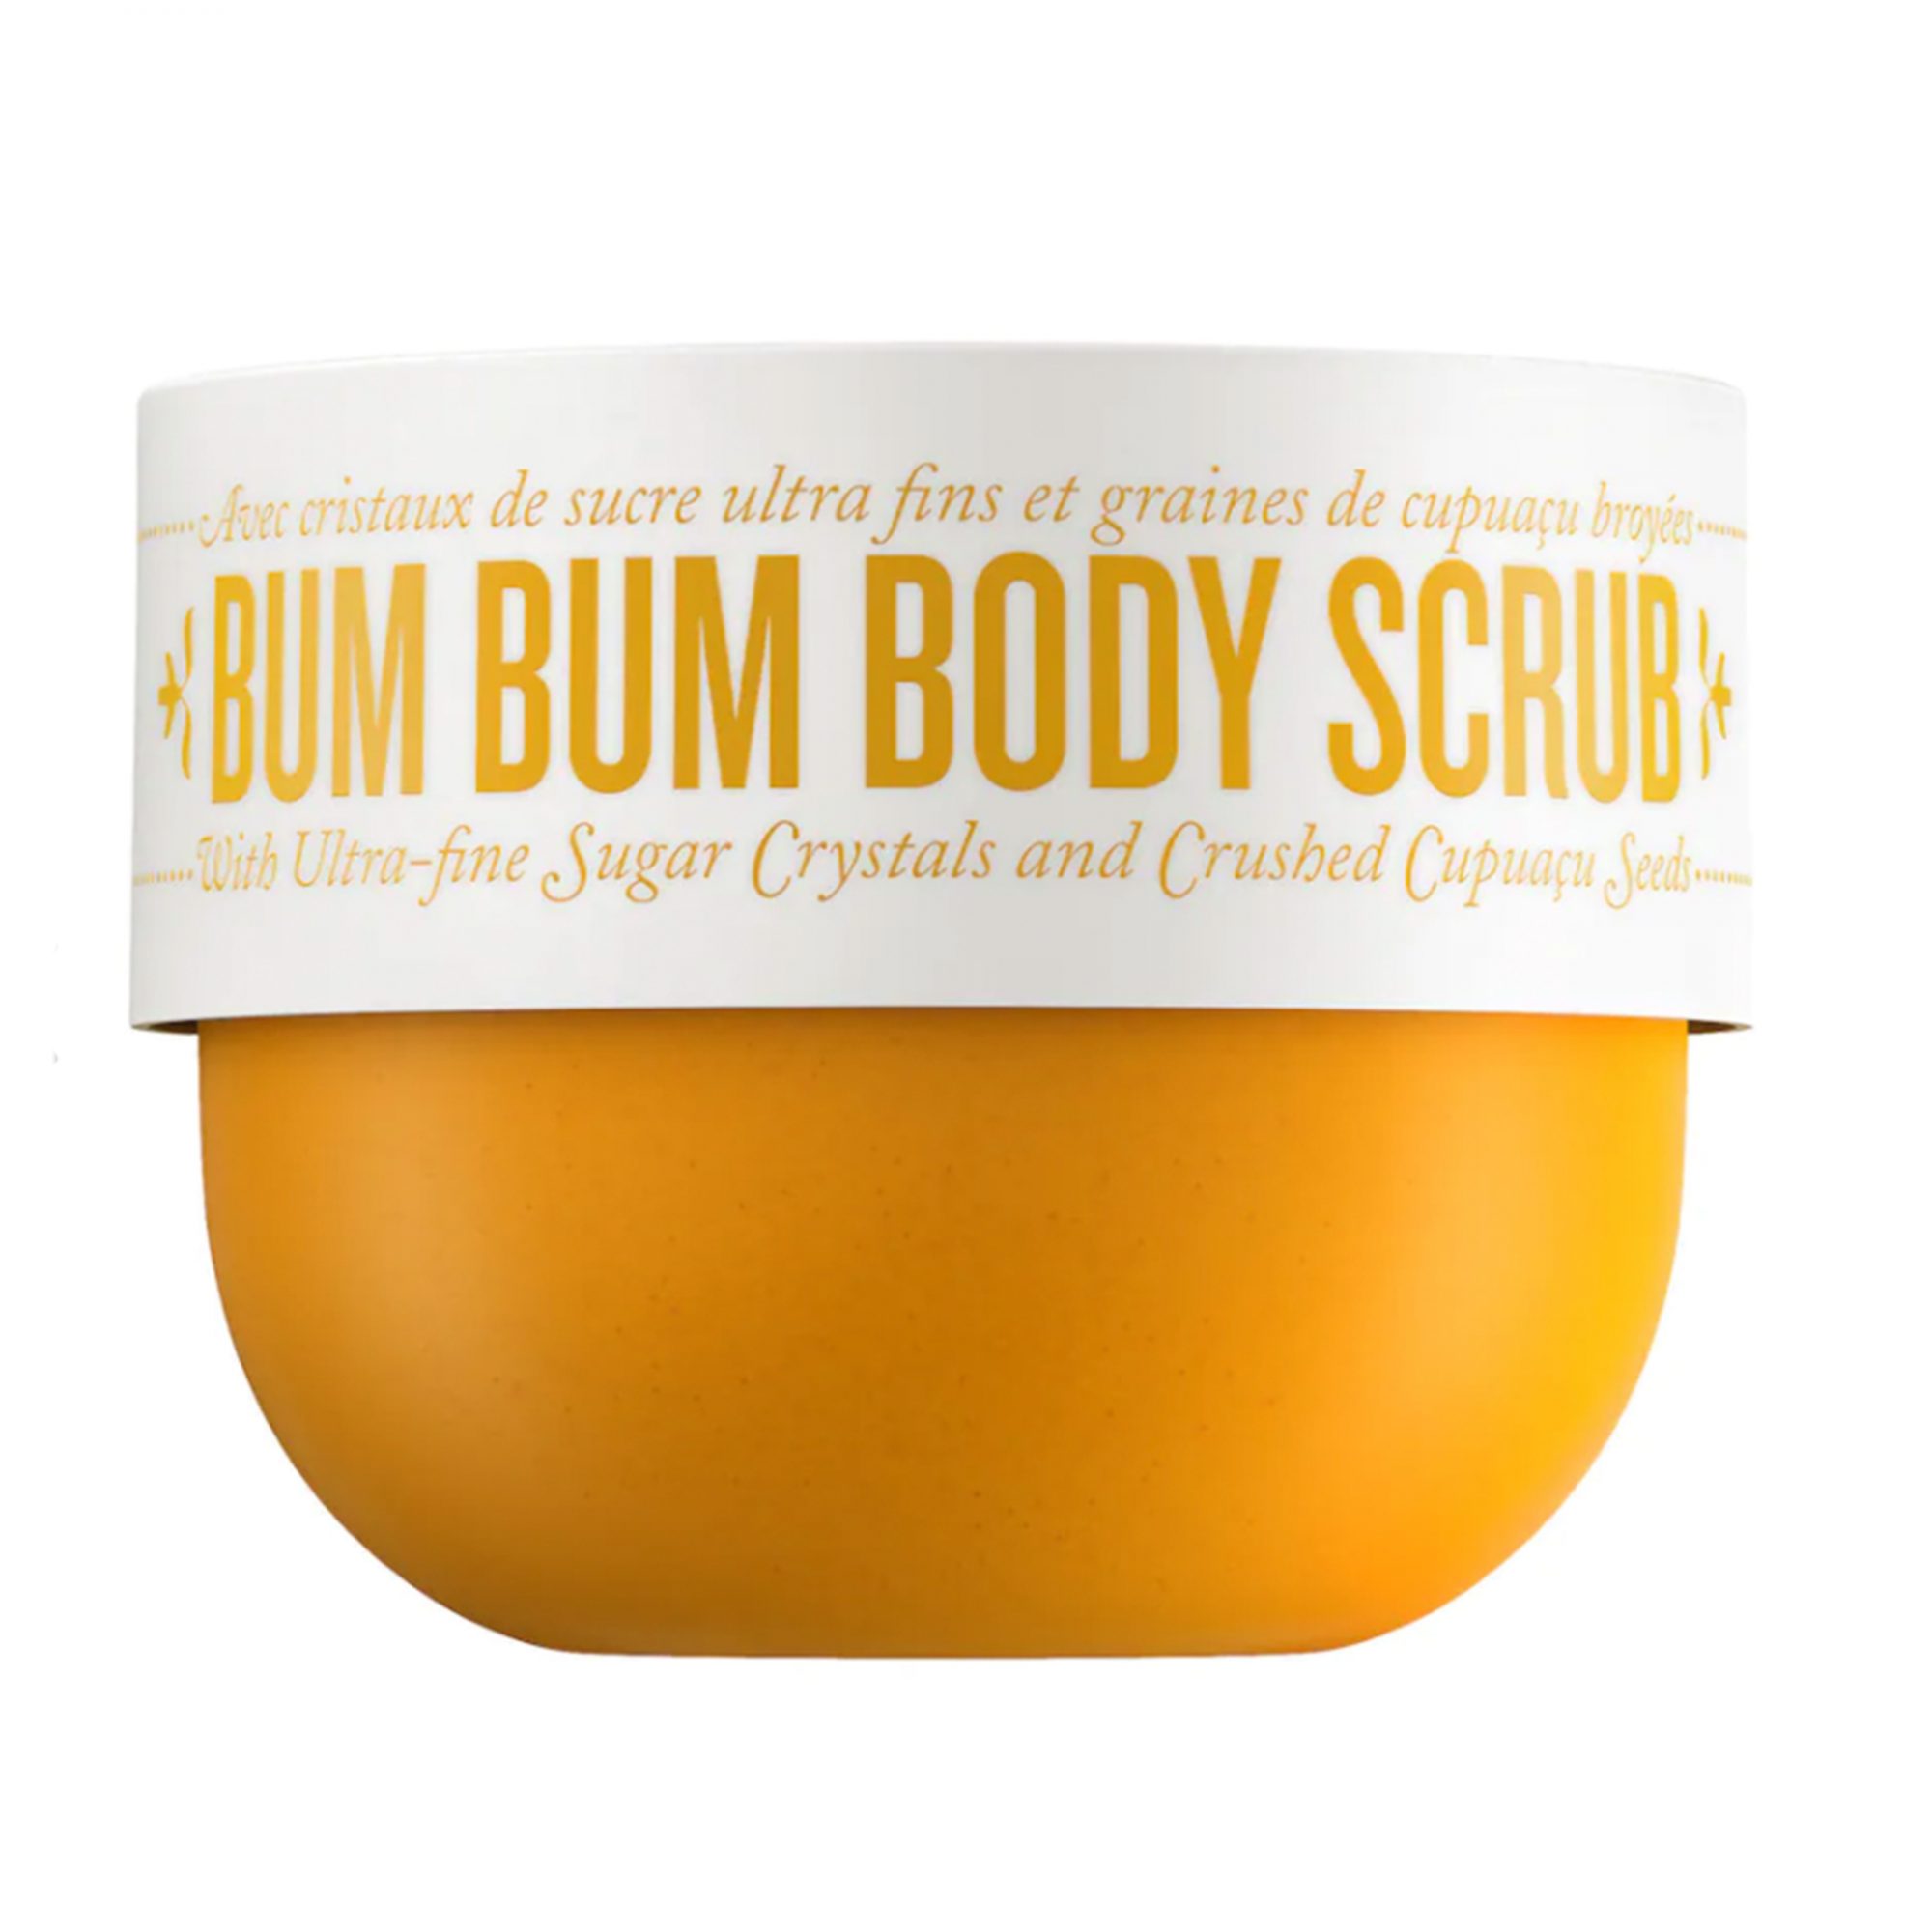 How To Use Sugar Scrubs, According to Skin Care ExpertsHelloGiggles